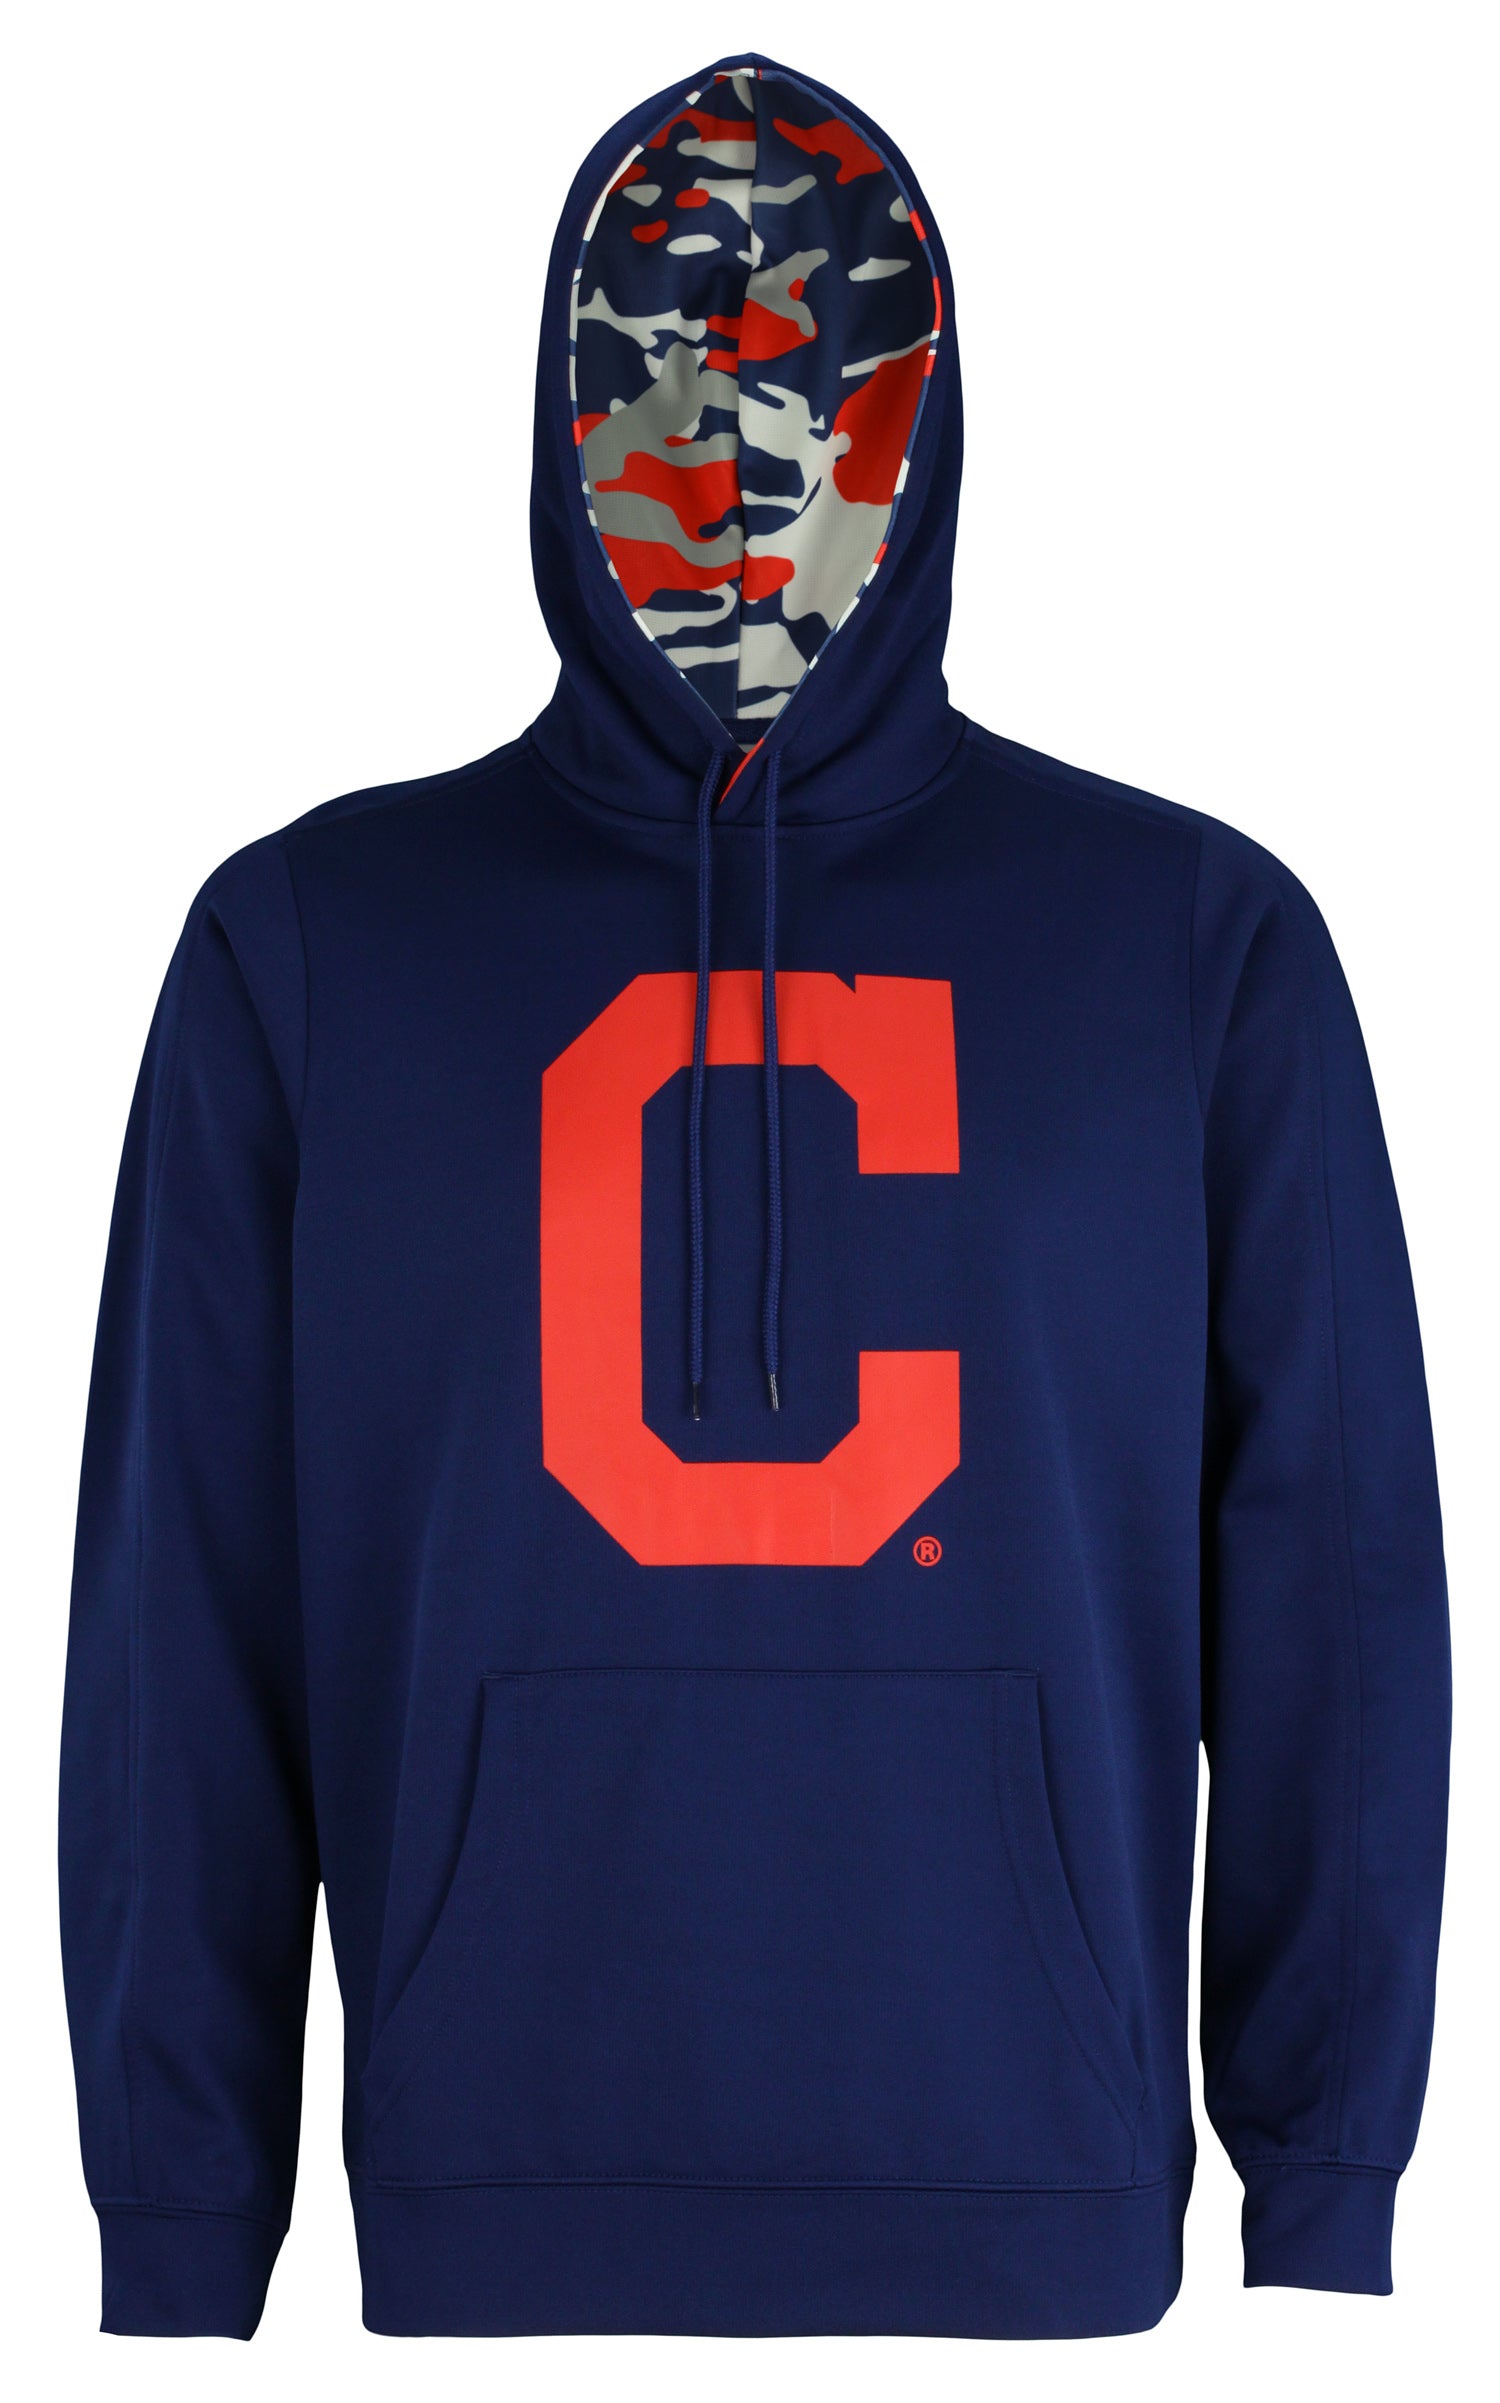 Max Moroff Player Issued Official Cleveland Indians 26 Majestic Authentic  Collection Pullover Hoodie  Big Dawg Possessions